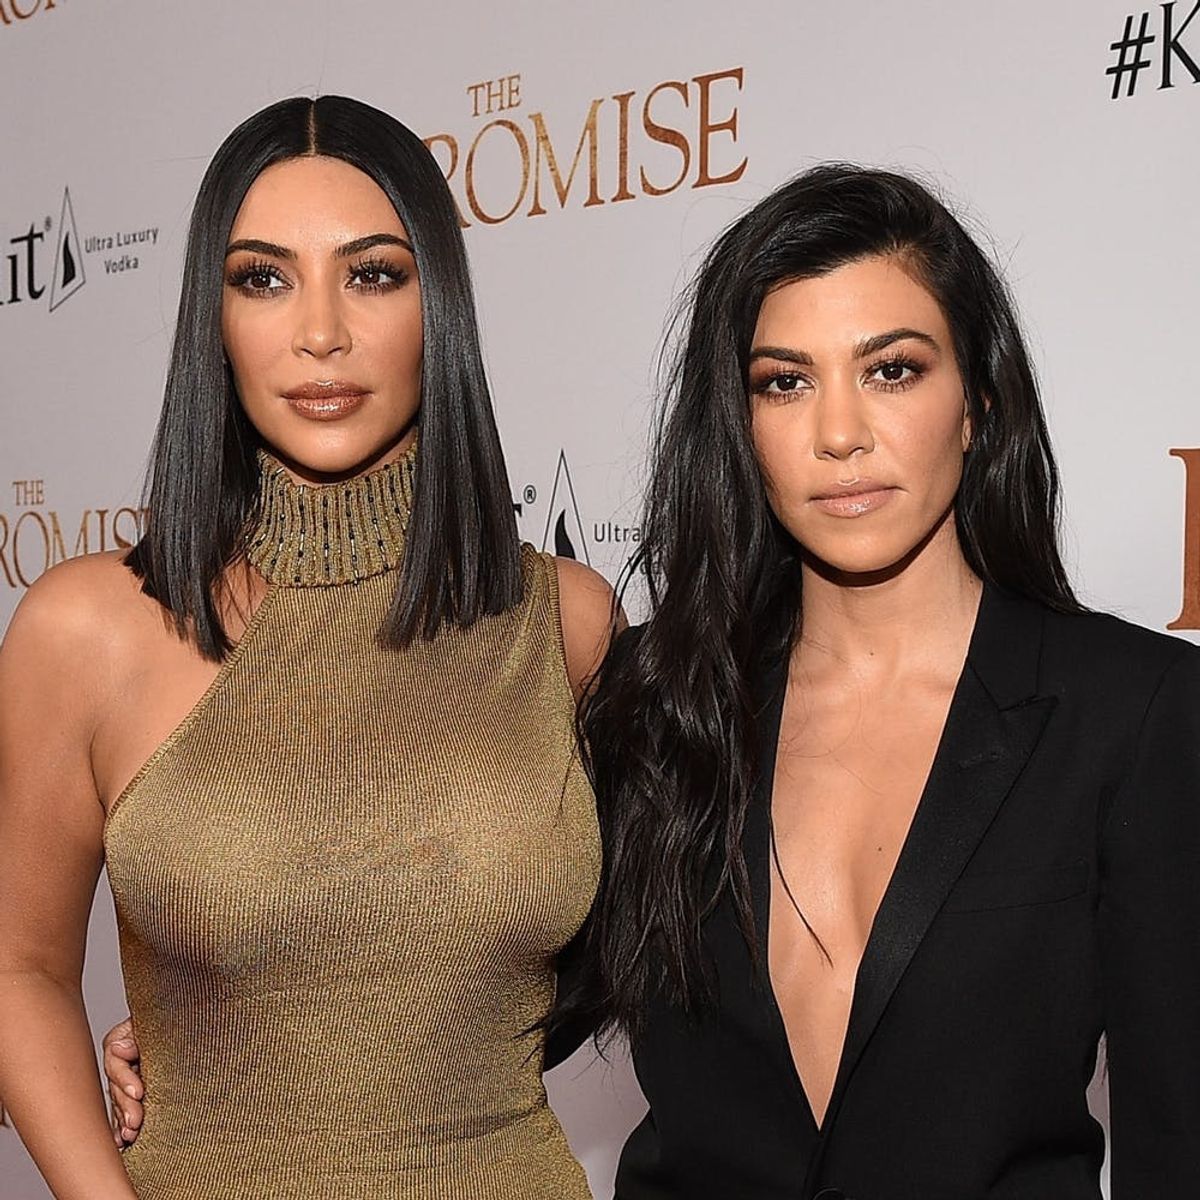 Kim Kardashian West and Kourtney Kardashian Just Pulled Off the Most Epic Couples’ Costume Ever